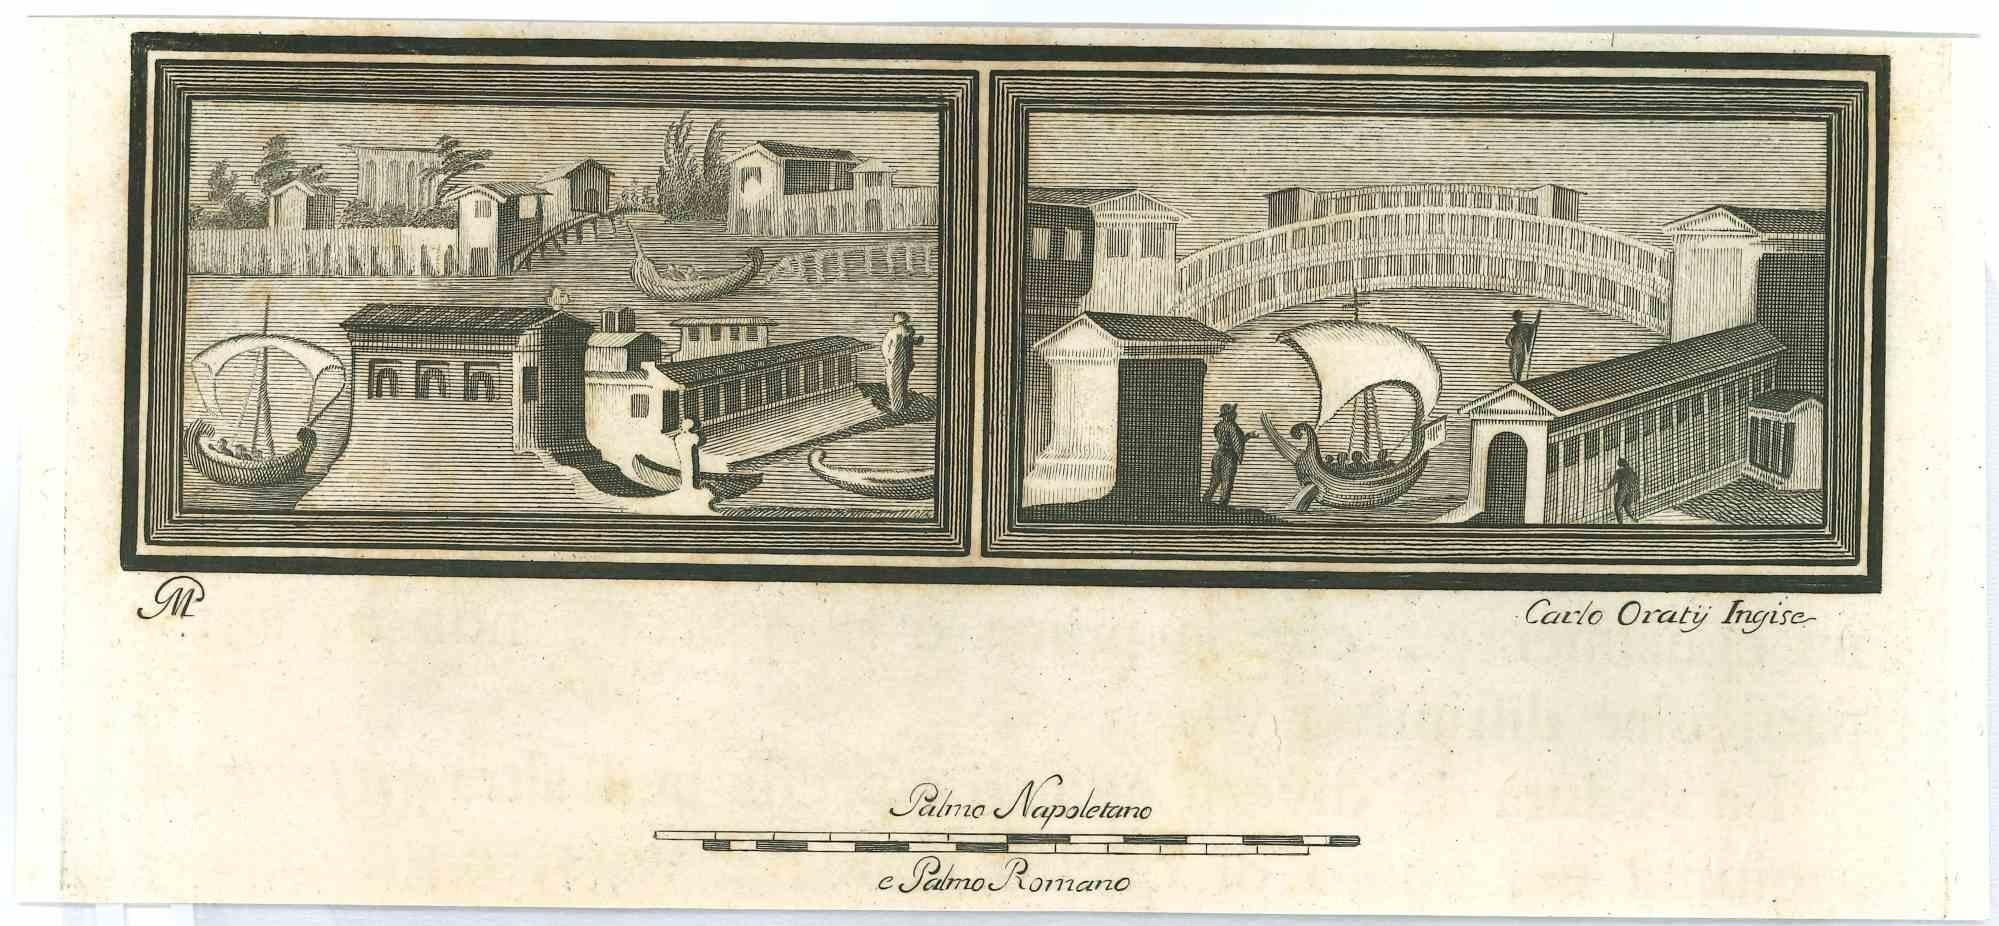 Ancient Roman Fresco, from the series "Antiquities of Herculaneum", is an original etching on paper realized from a design by Carlo Oraty in the 18th century.

Signed on the plate.

Good conditions.

The etching belongs to the print suite